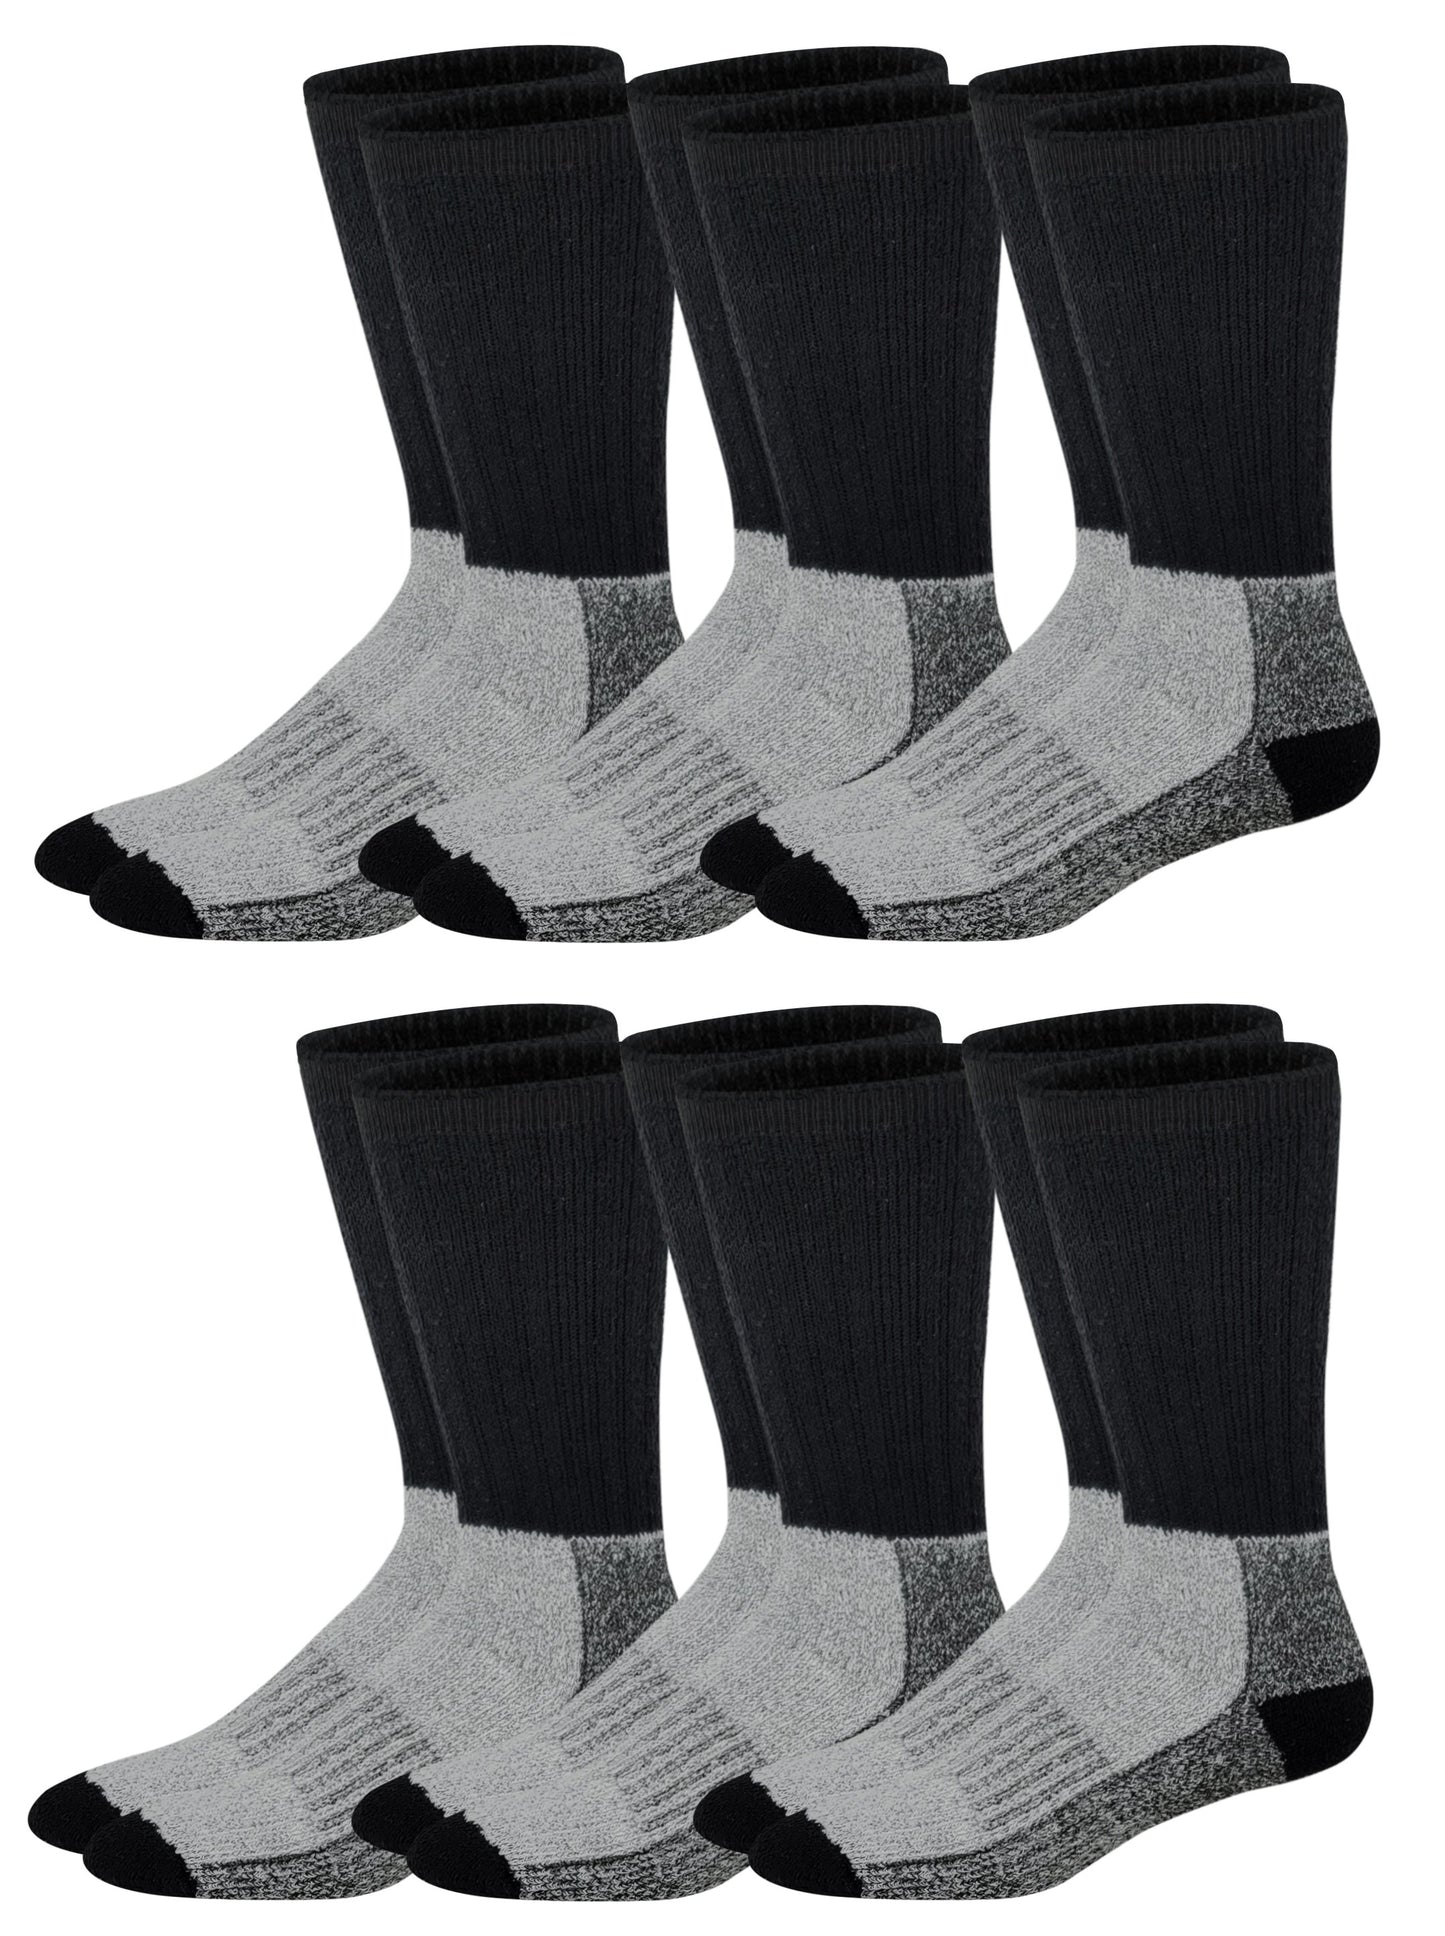 6 Pairs Black Men's Heavy Weight Wool Blend Extreme Weather Thermal Winter Socks